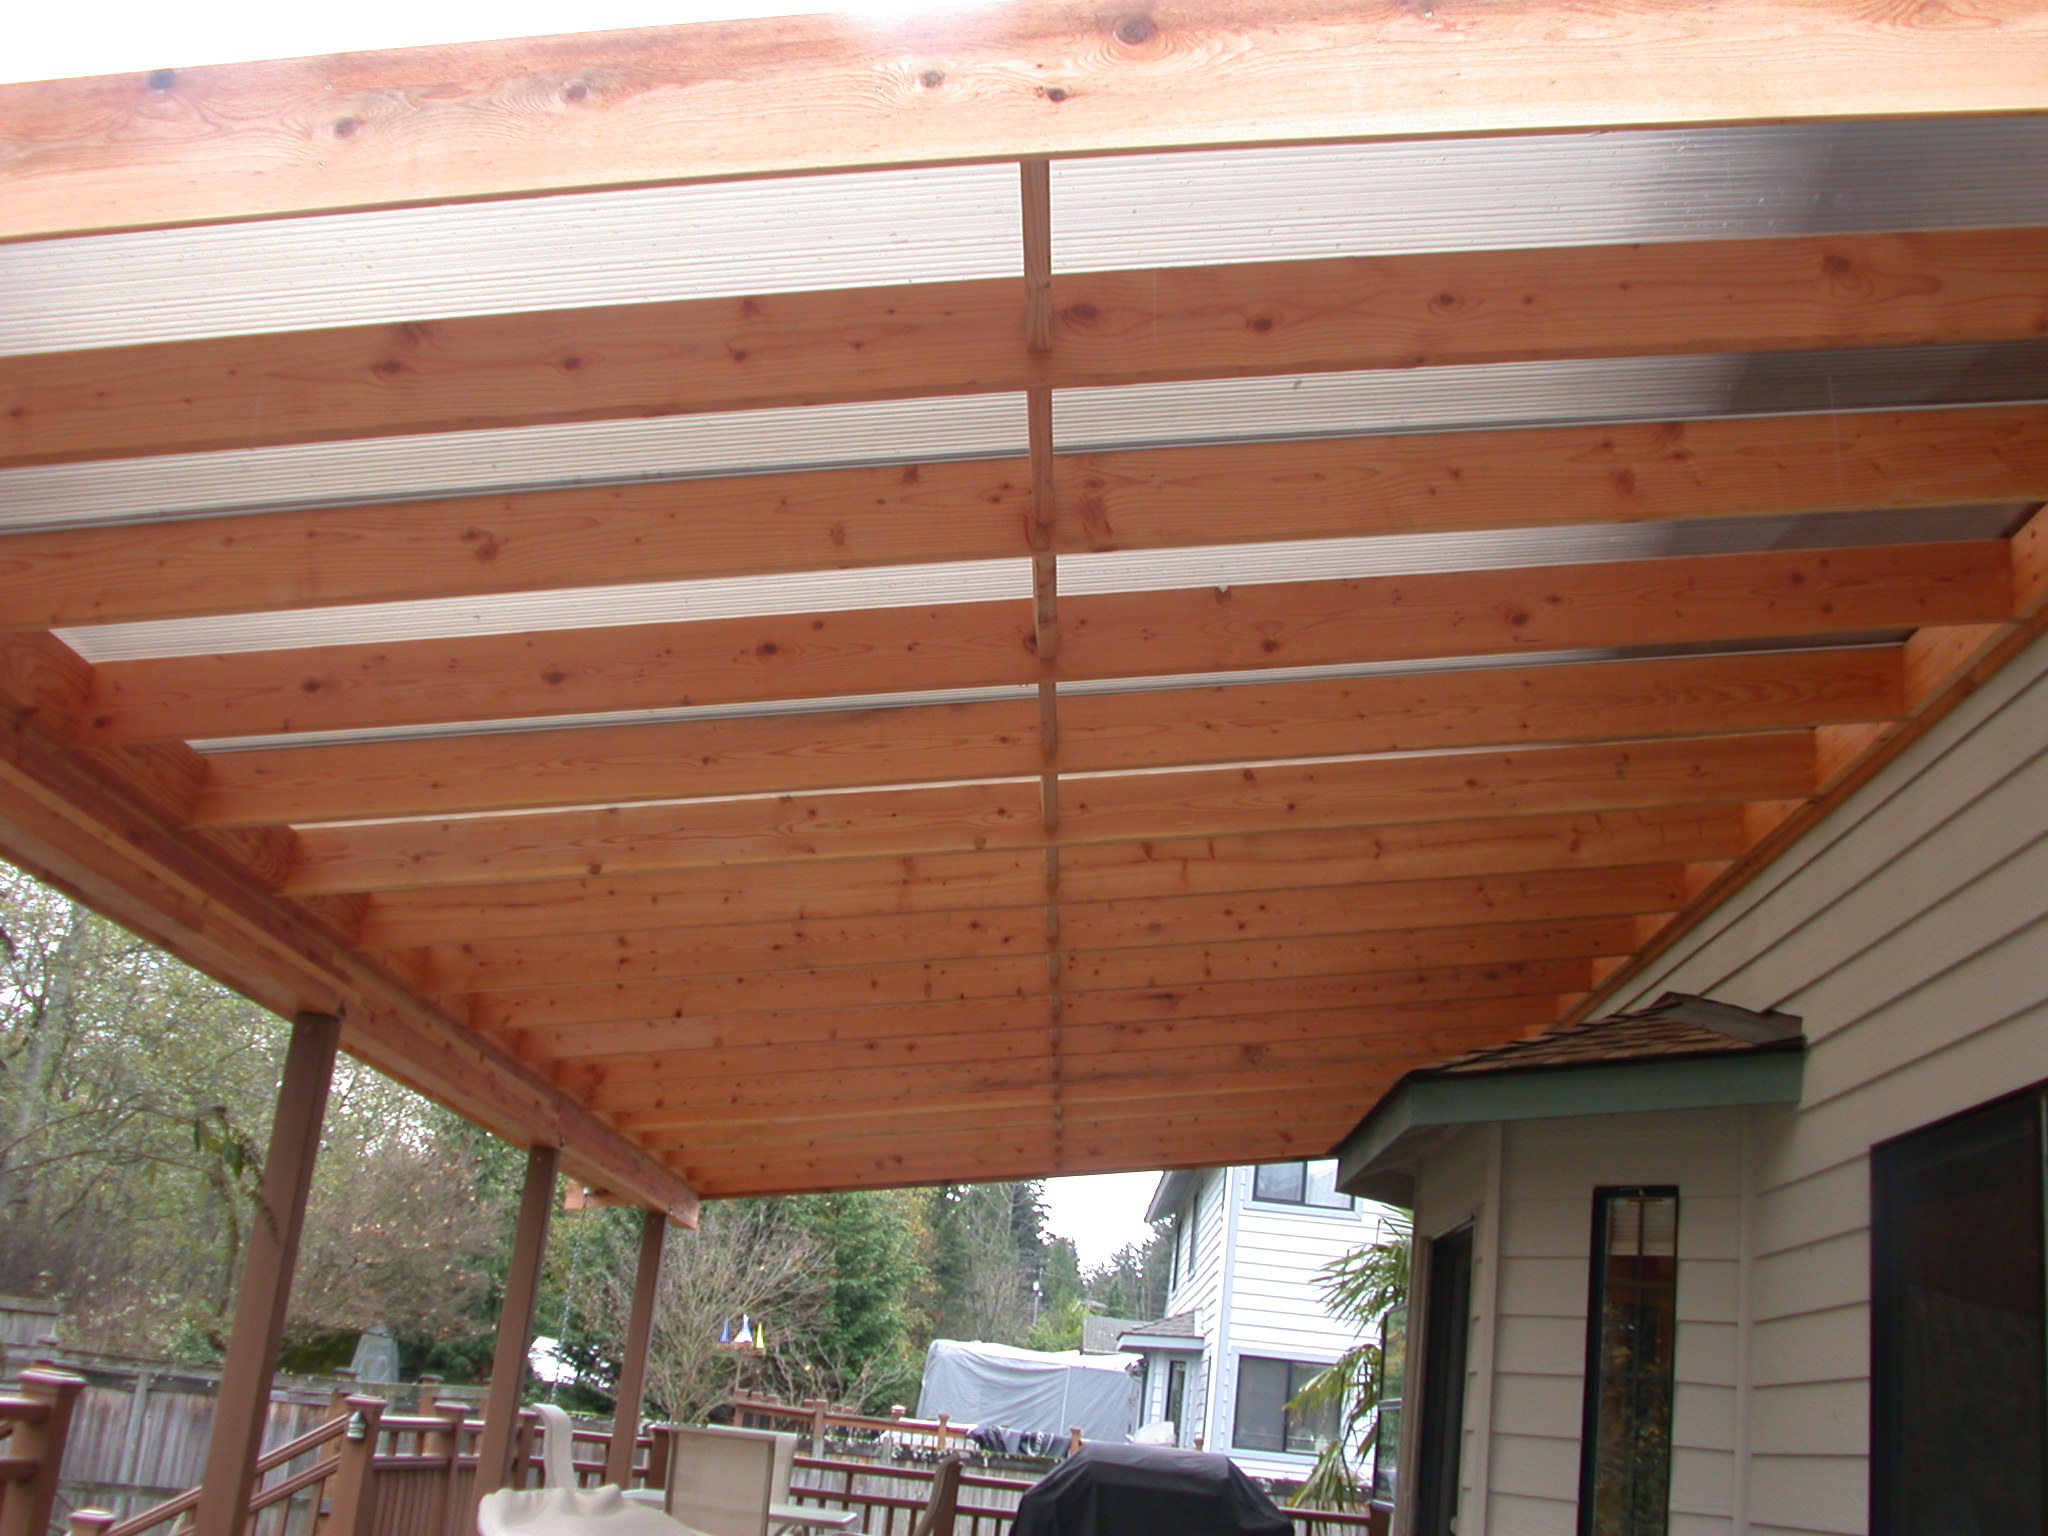 The roof of the patio cover is made of dual panel polycarbonate 